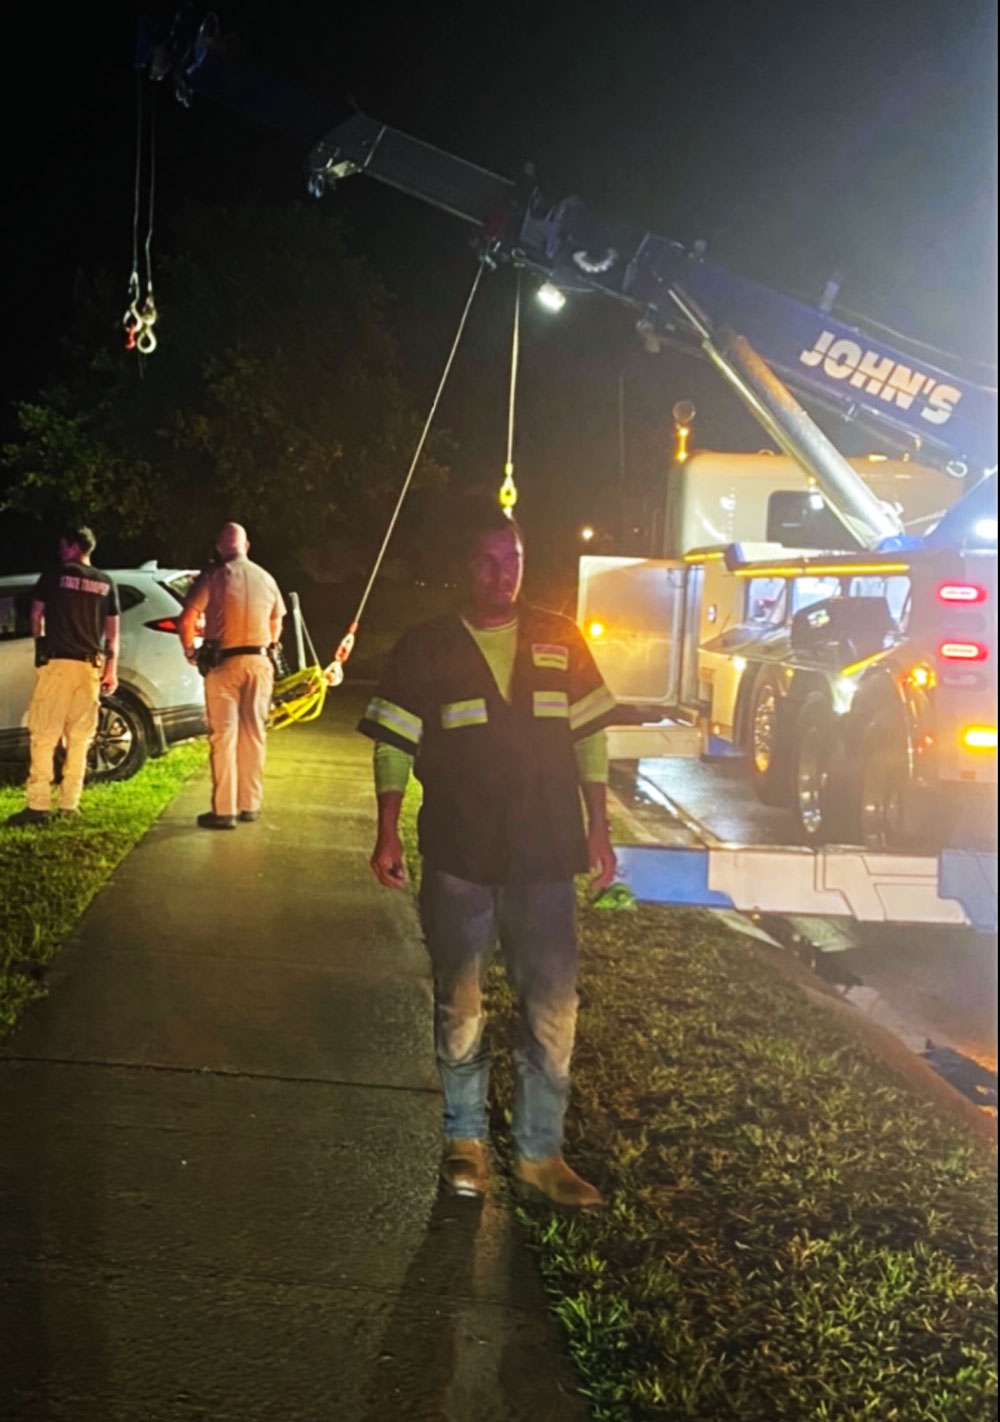 Trey Russell, one of the John's Towing employees at the scene, with the 50-ton Rotator Wrecker in the background used to pulled the vehicle out of the pond. (© John's Towing)